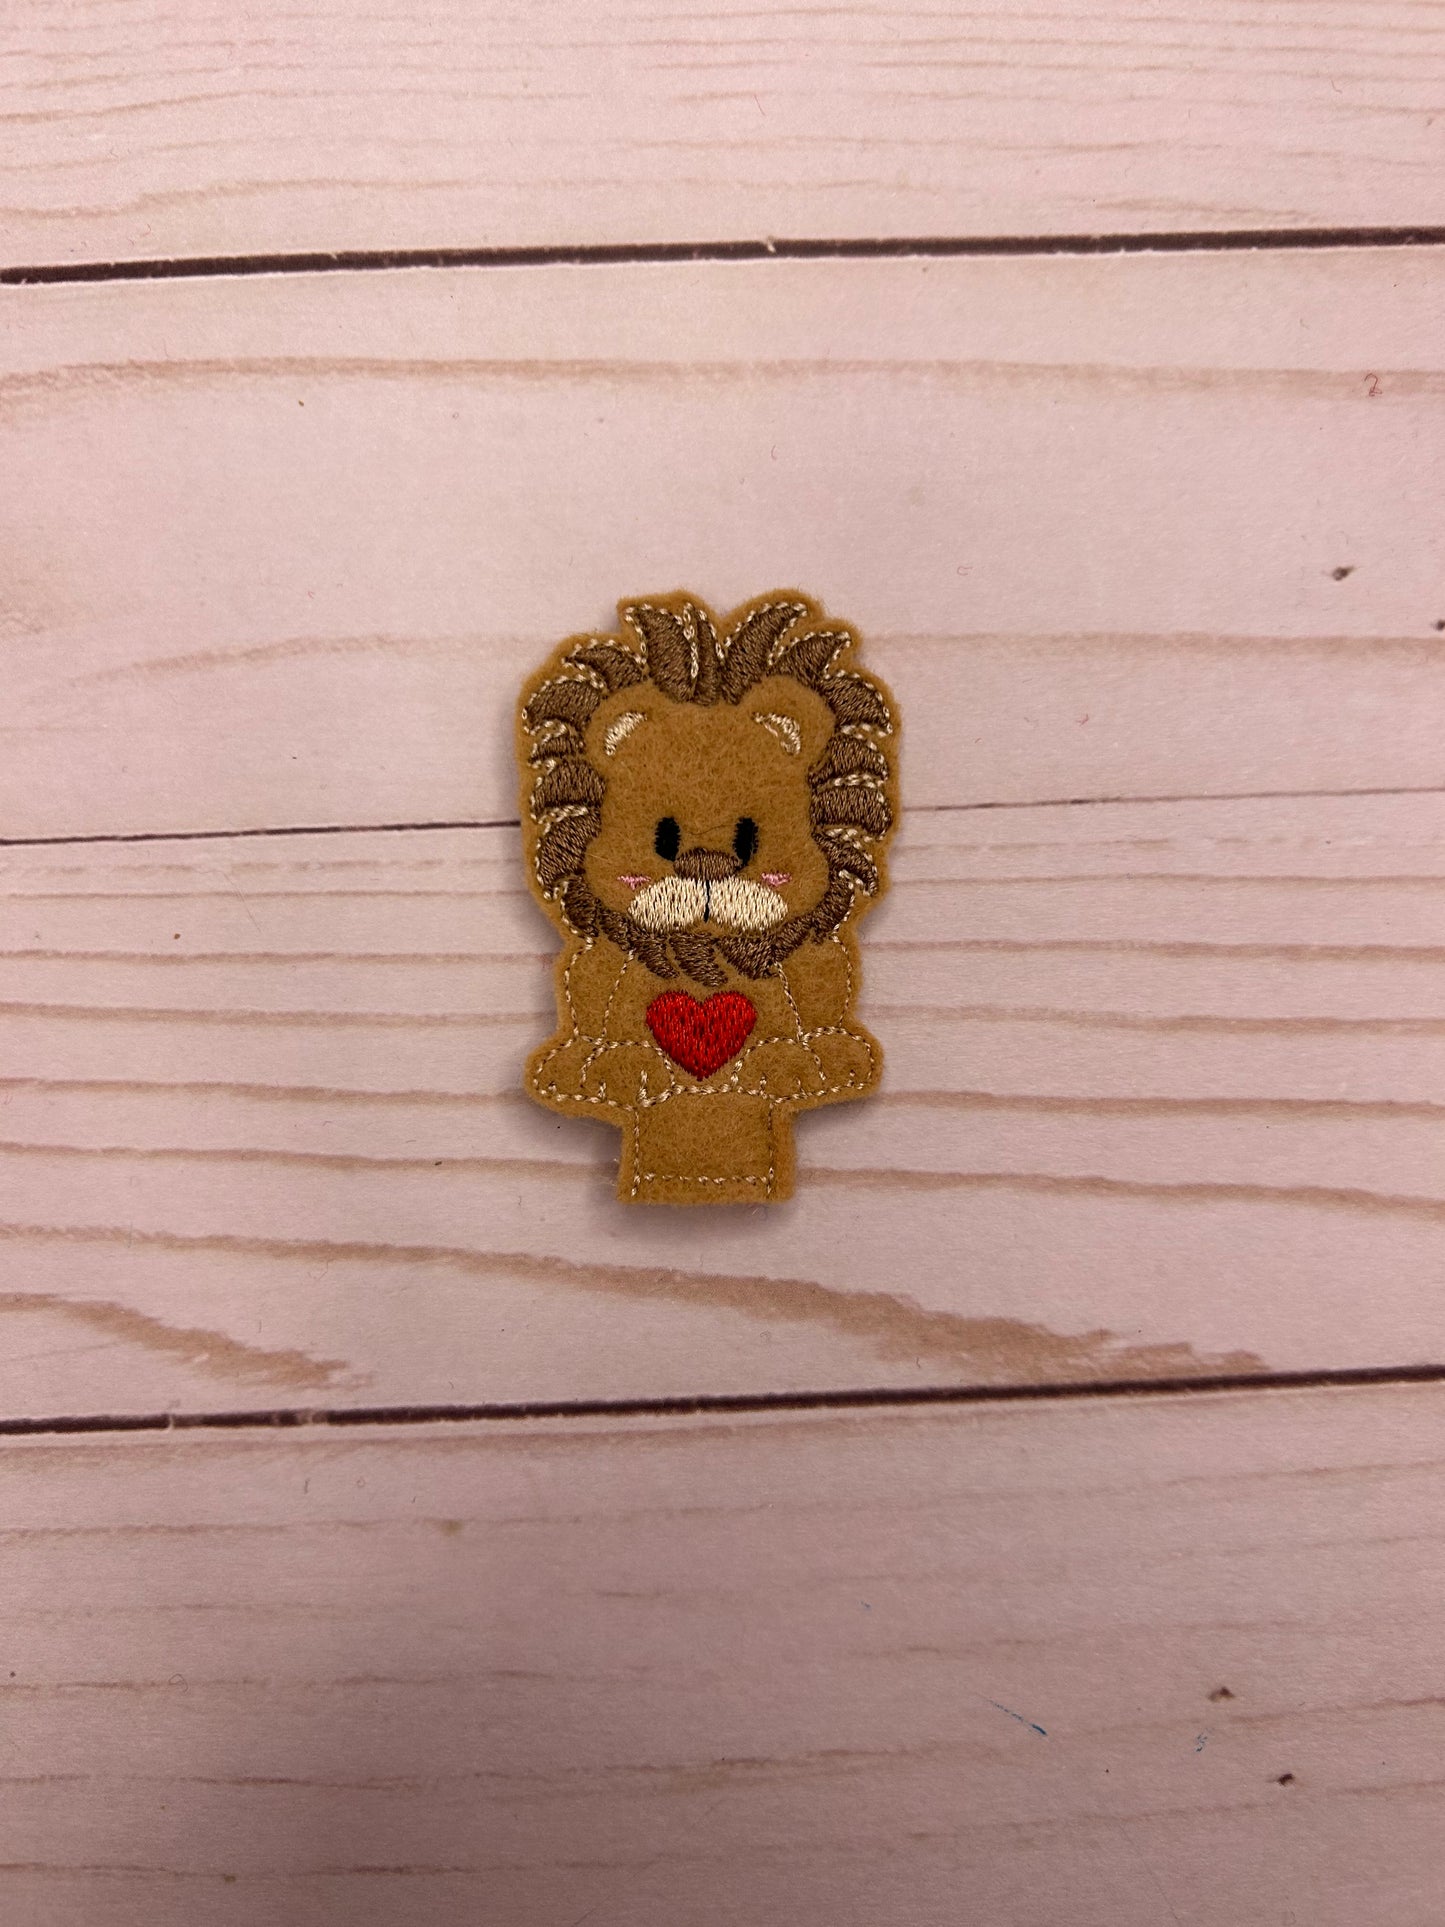 Lion Heart Pencil Topper | Embroidered Toppers, School Accessories, Back To School, Office Supplies, Pen Topper, School Supplies, Party Favor